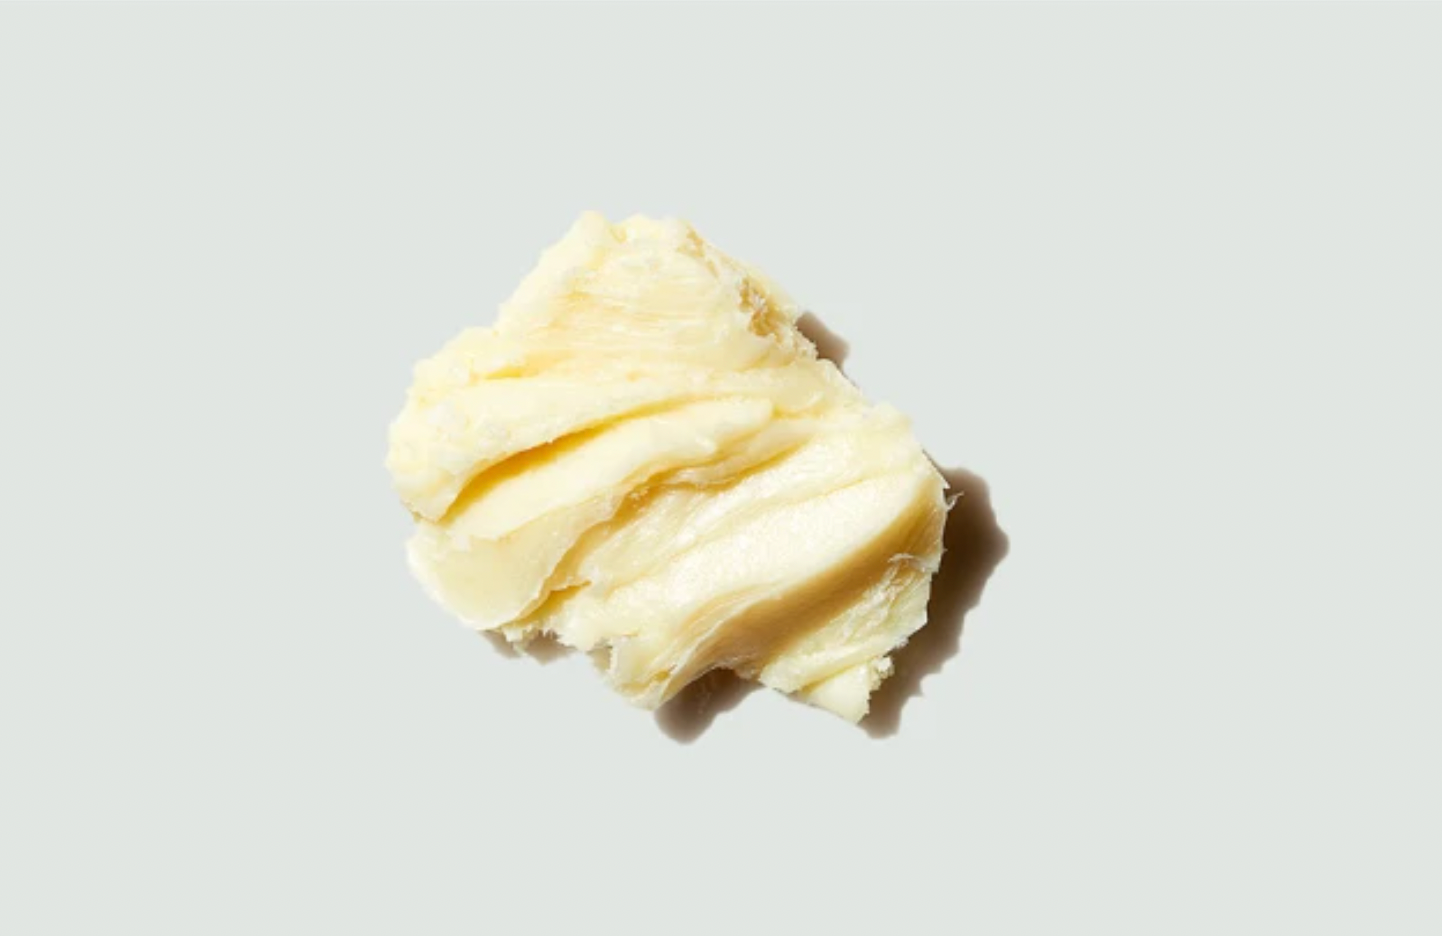 The Unexpected Uses for Shea Butter